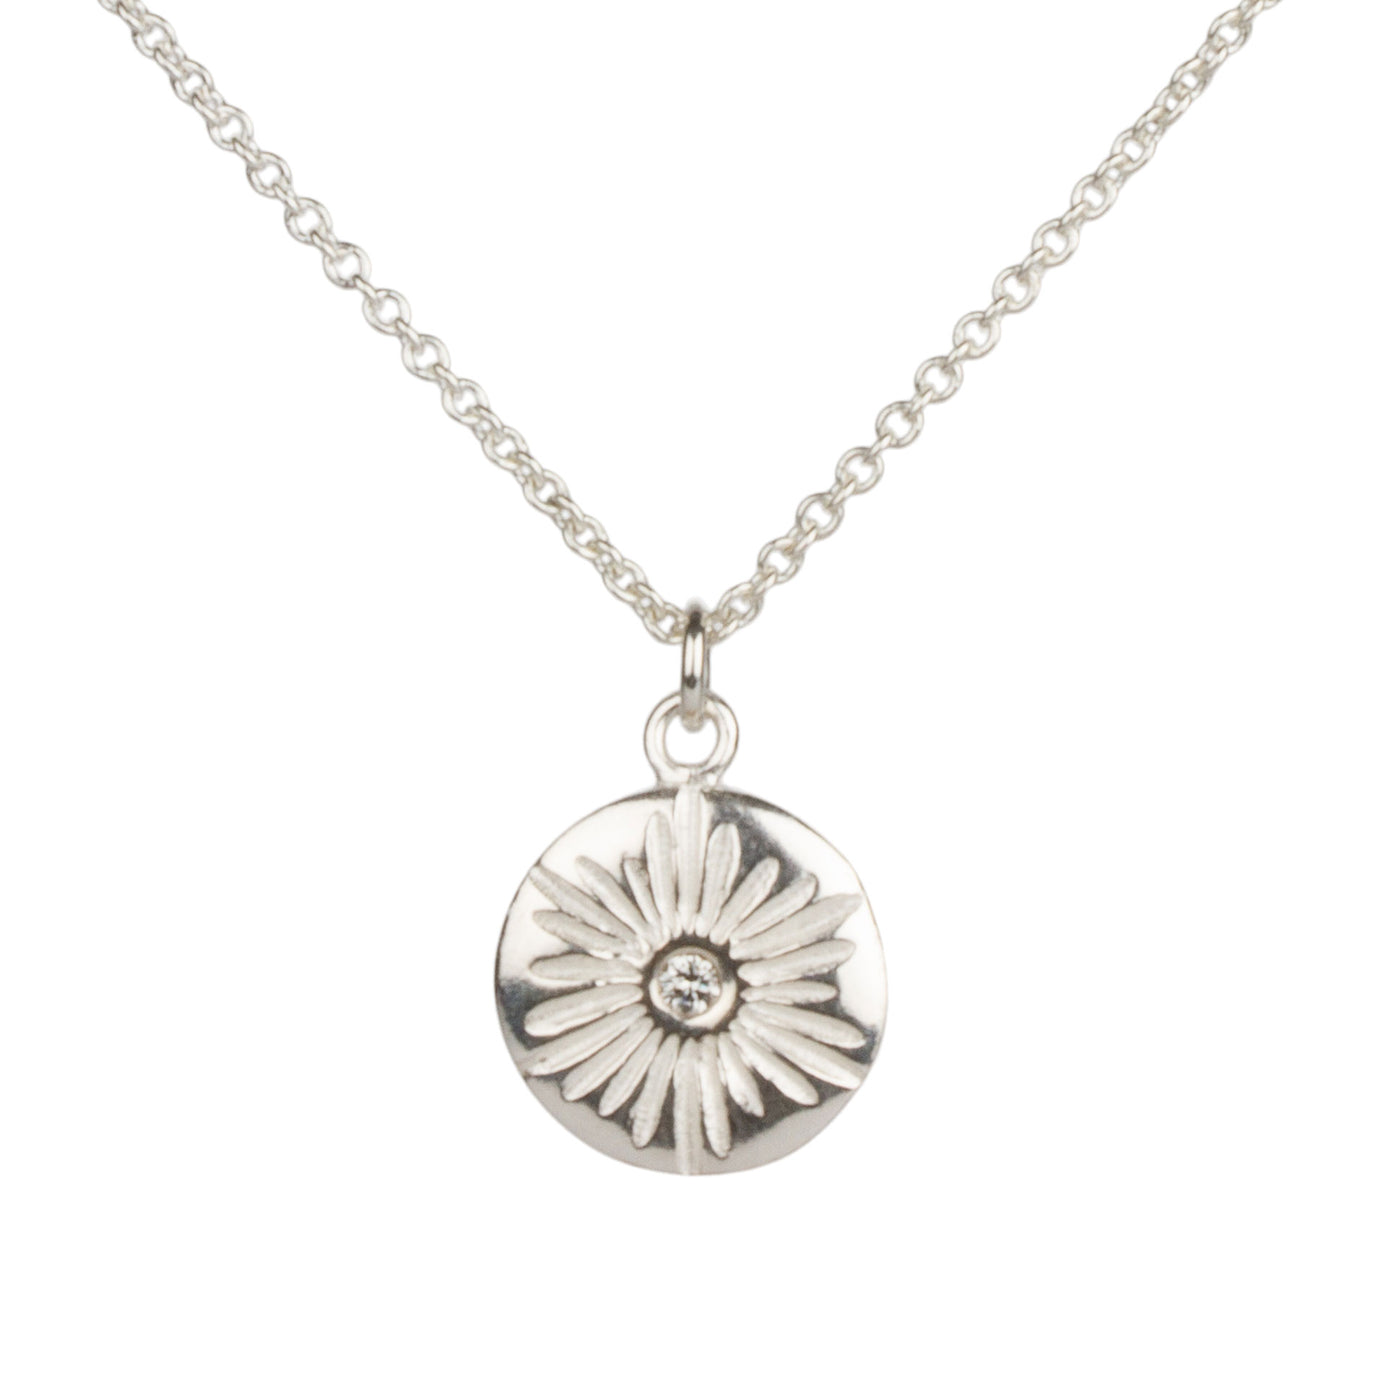 Large Lucia Diamond Necklace on a white background by Corey Egan